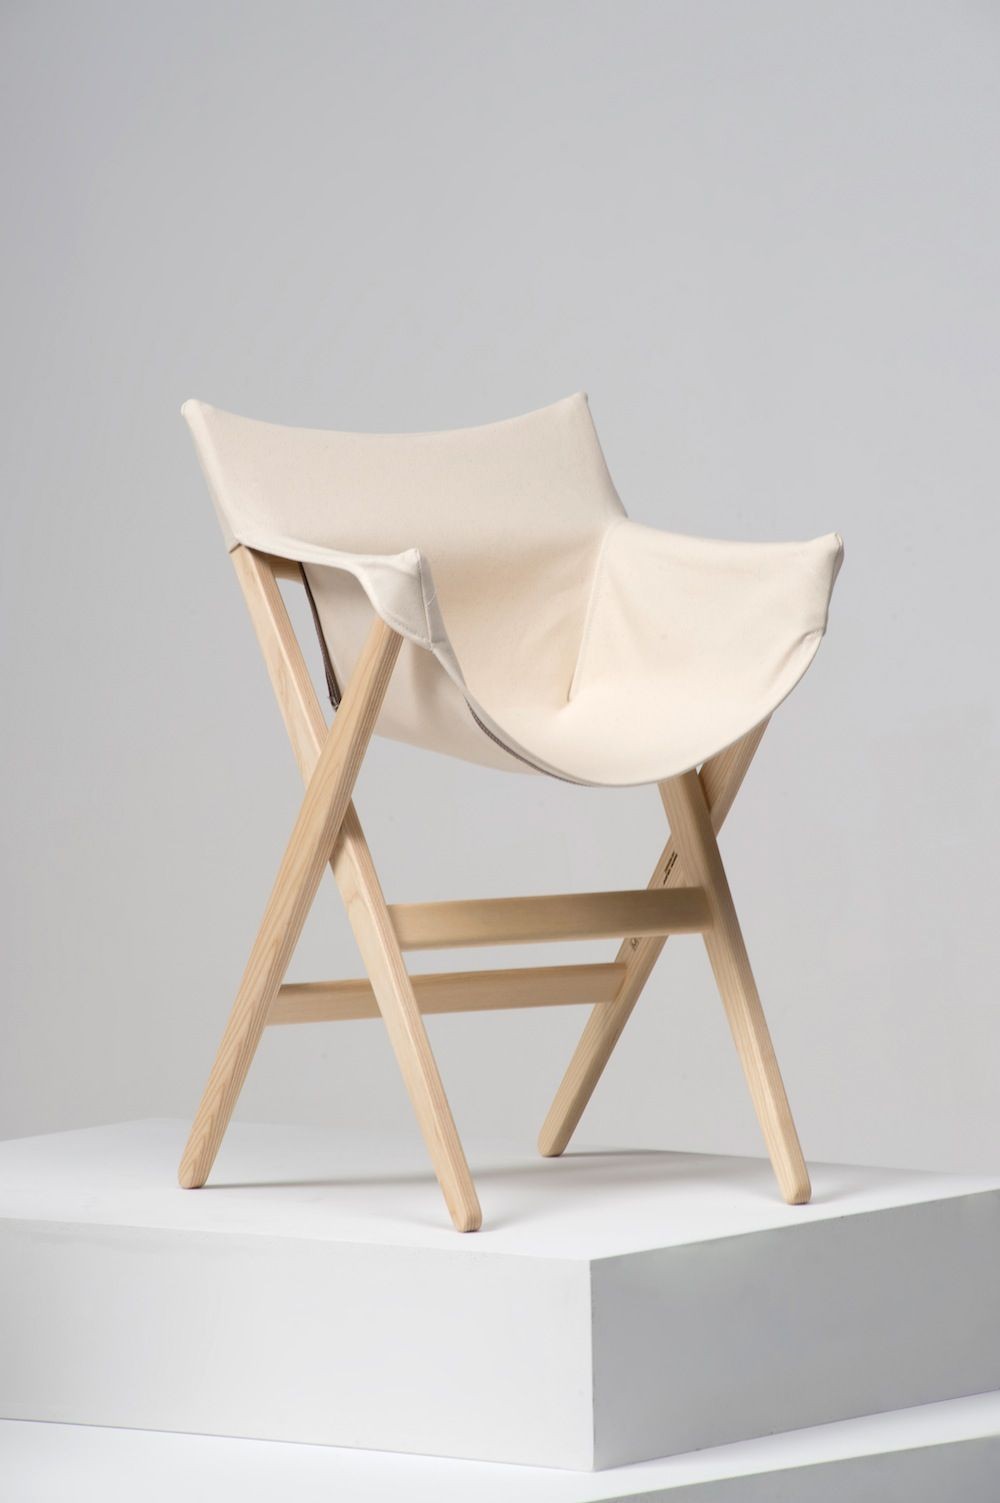 Lina leather folding chair